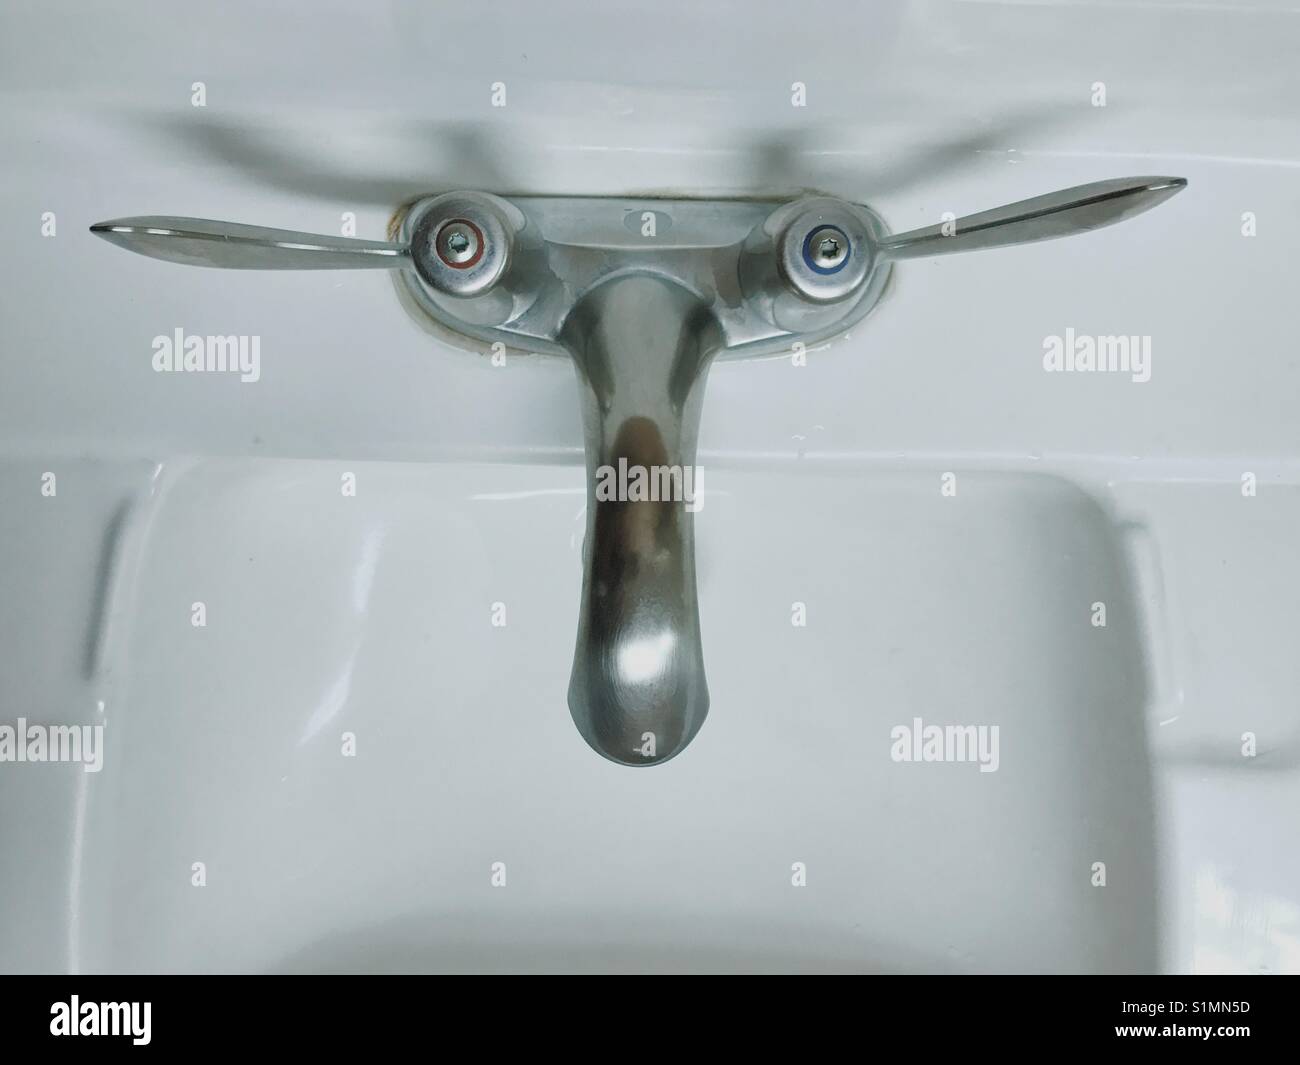 A found face, seen at a public restroom sink in New Jersey, USA. Stock Photo